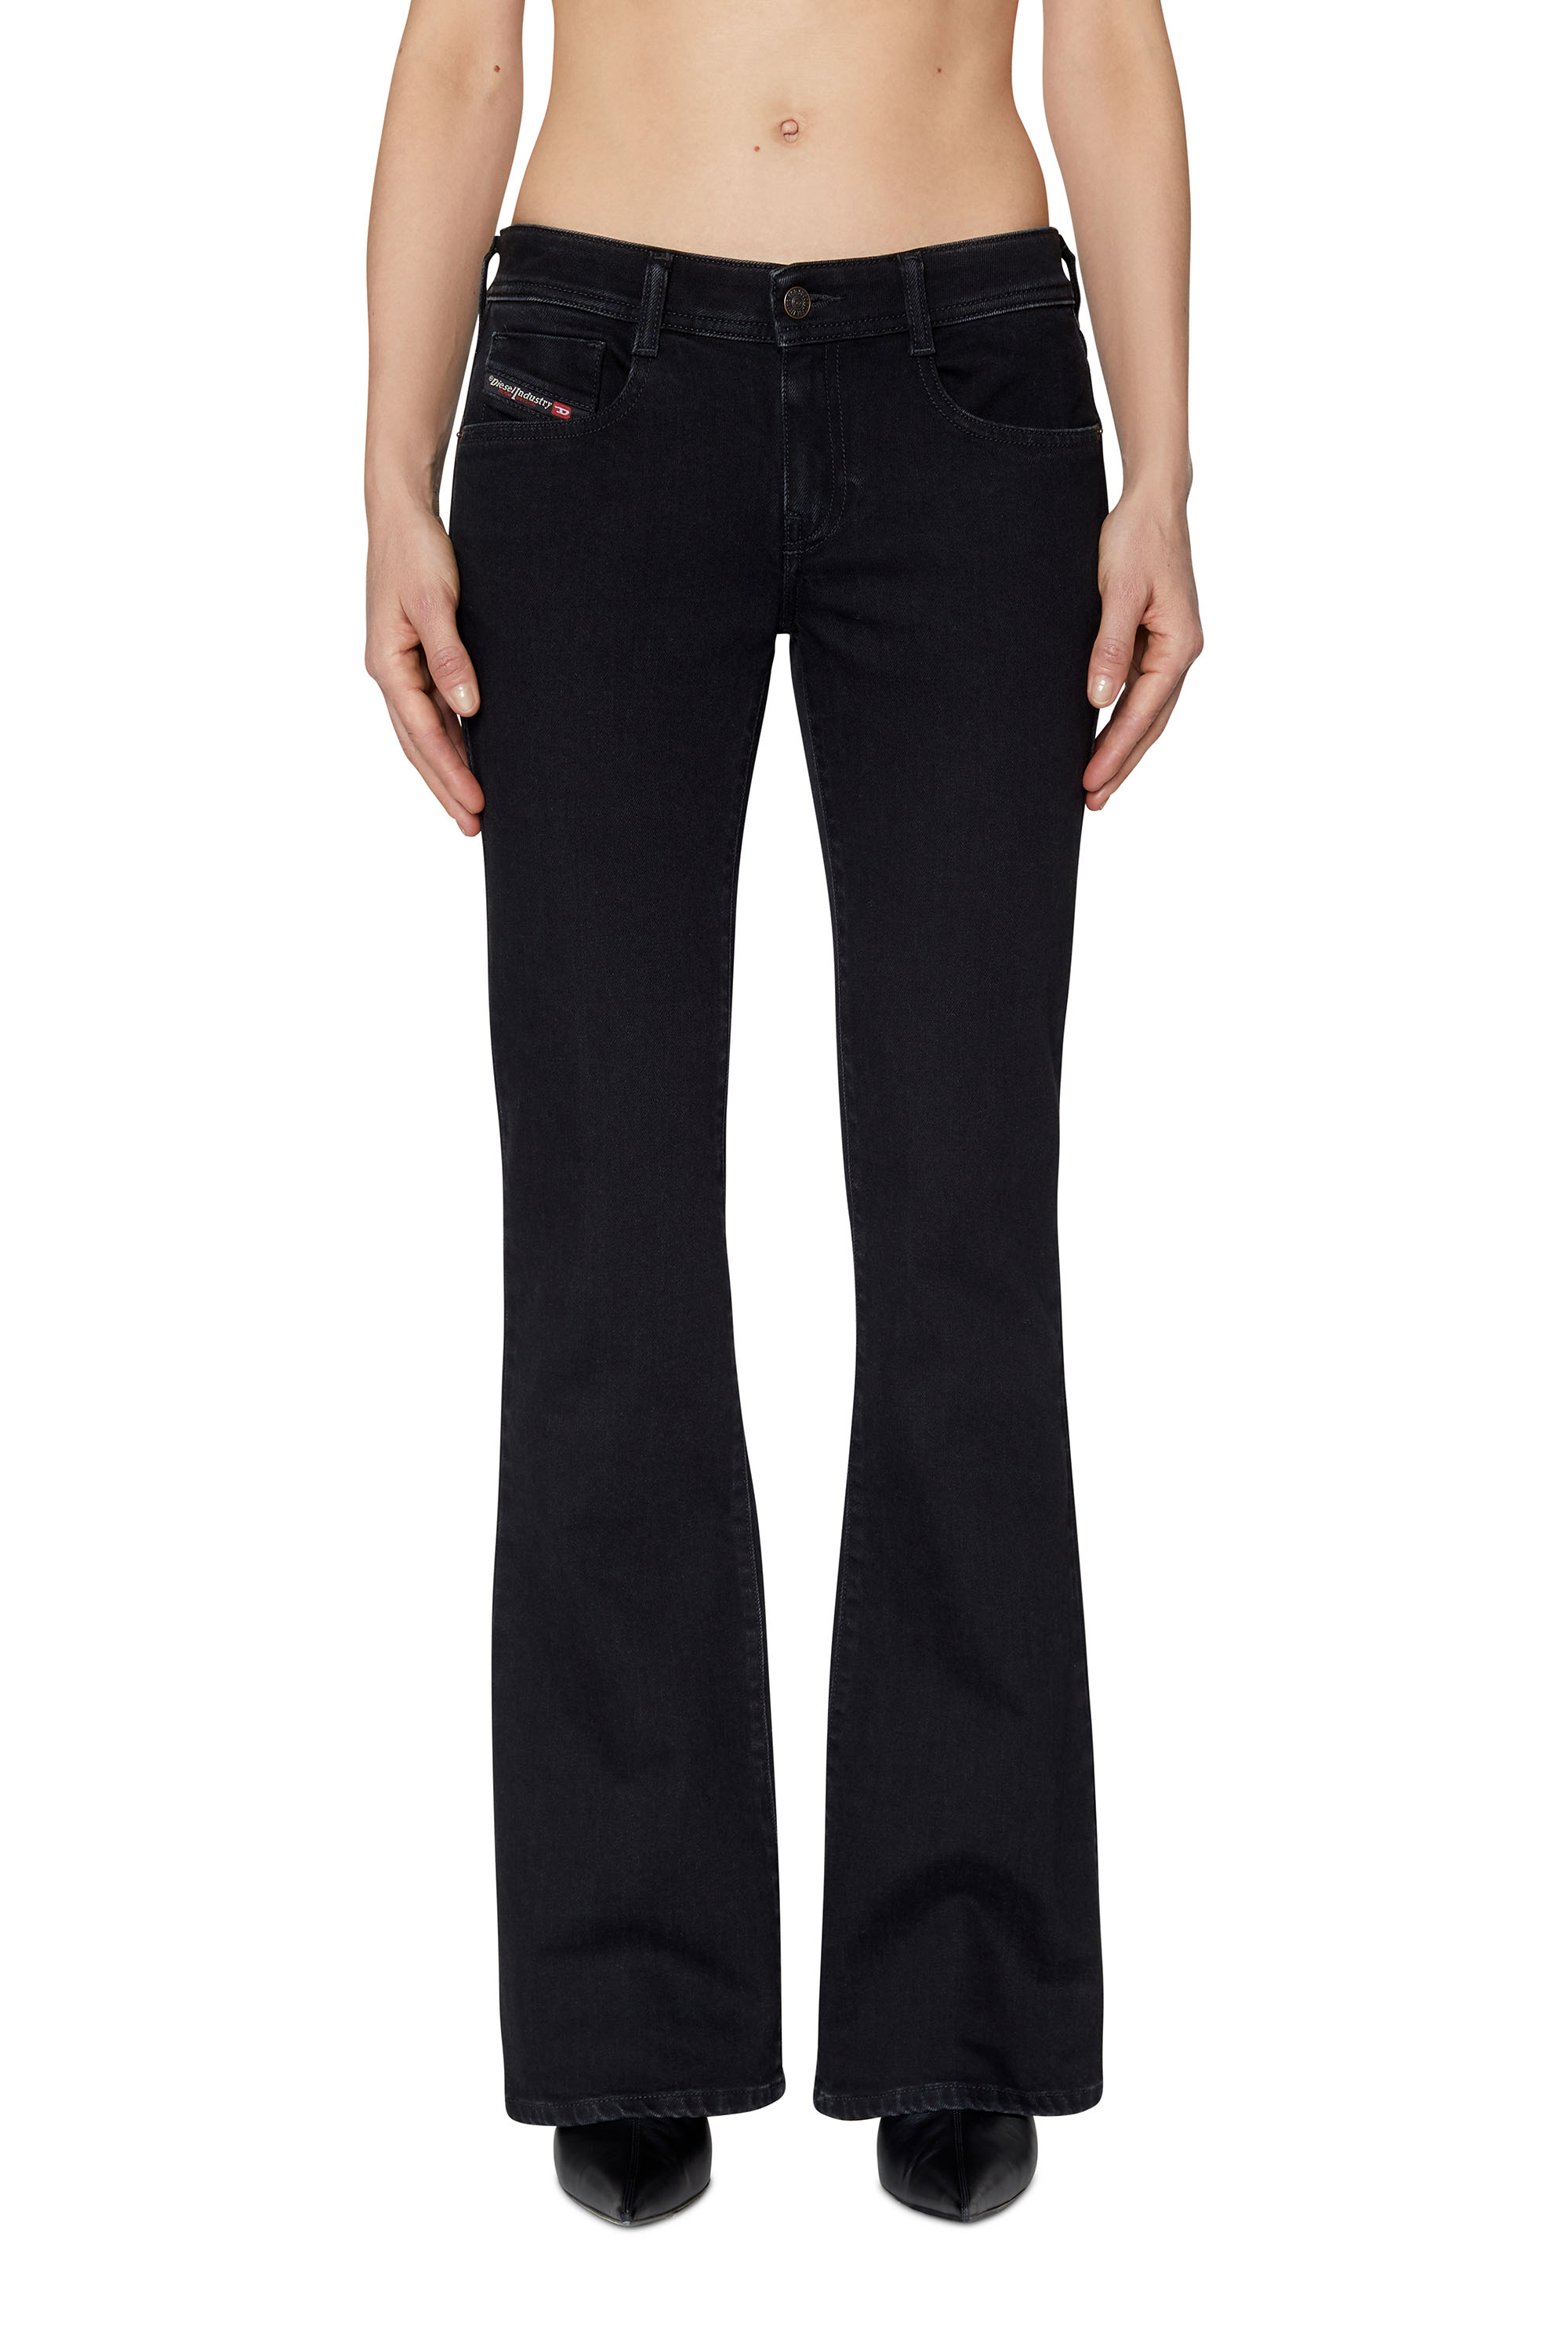 Bootcut and Flare Jeans 1969 D-Ebbey Z9C25, Black/Dark grey - Jeans